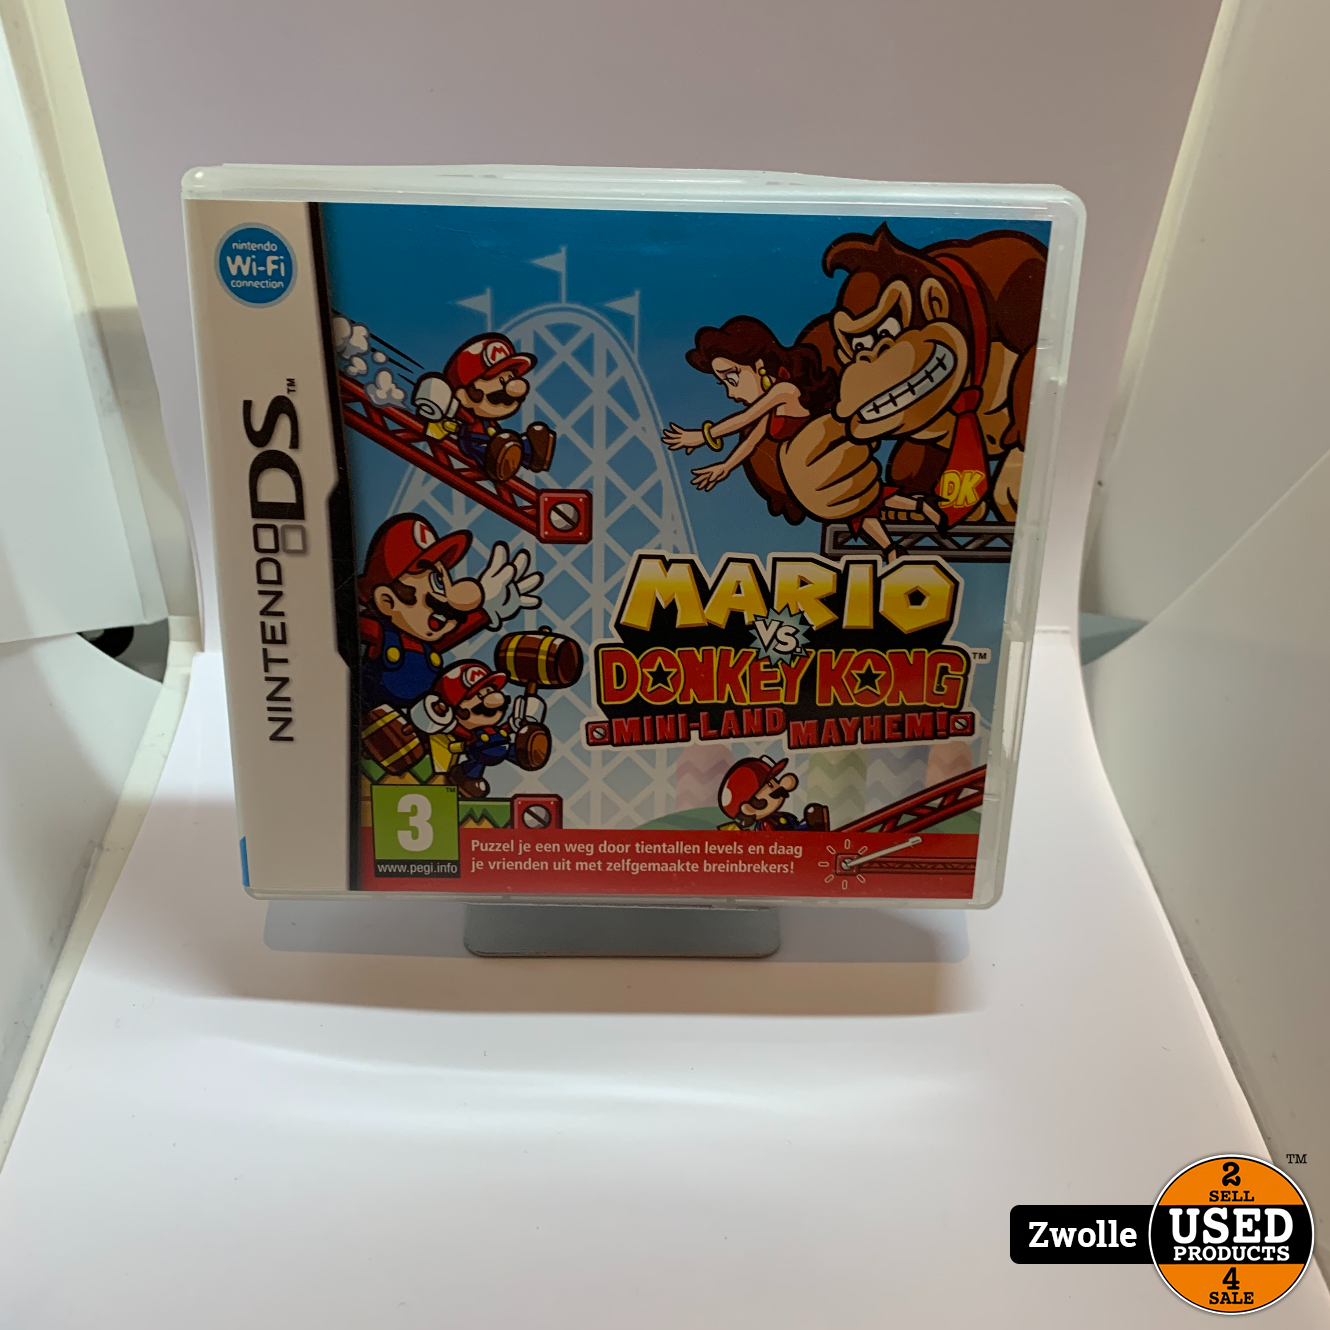 nintendo DS game | Mario VS Donkey Kong - Used Products Zwolle